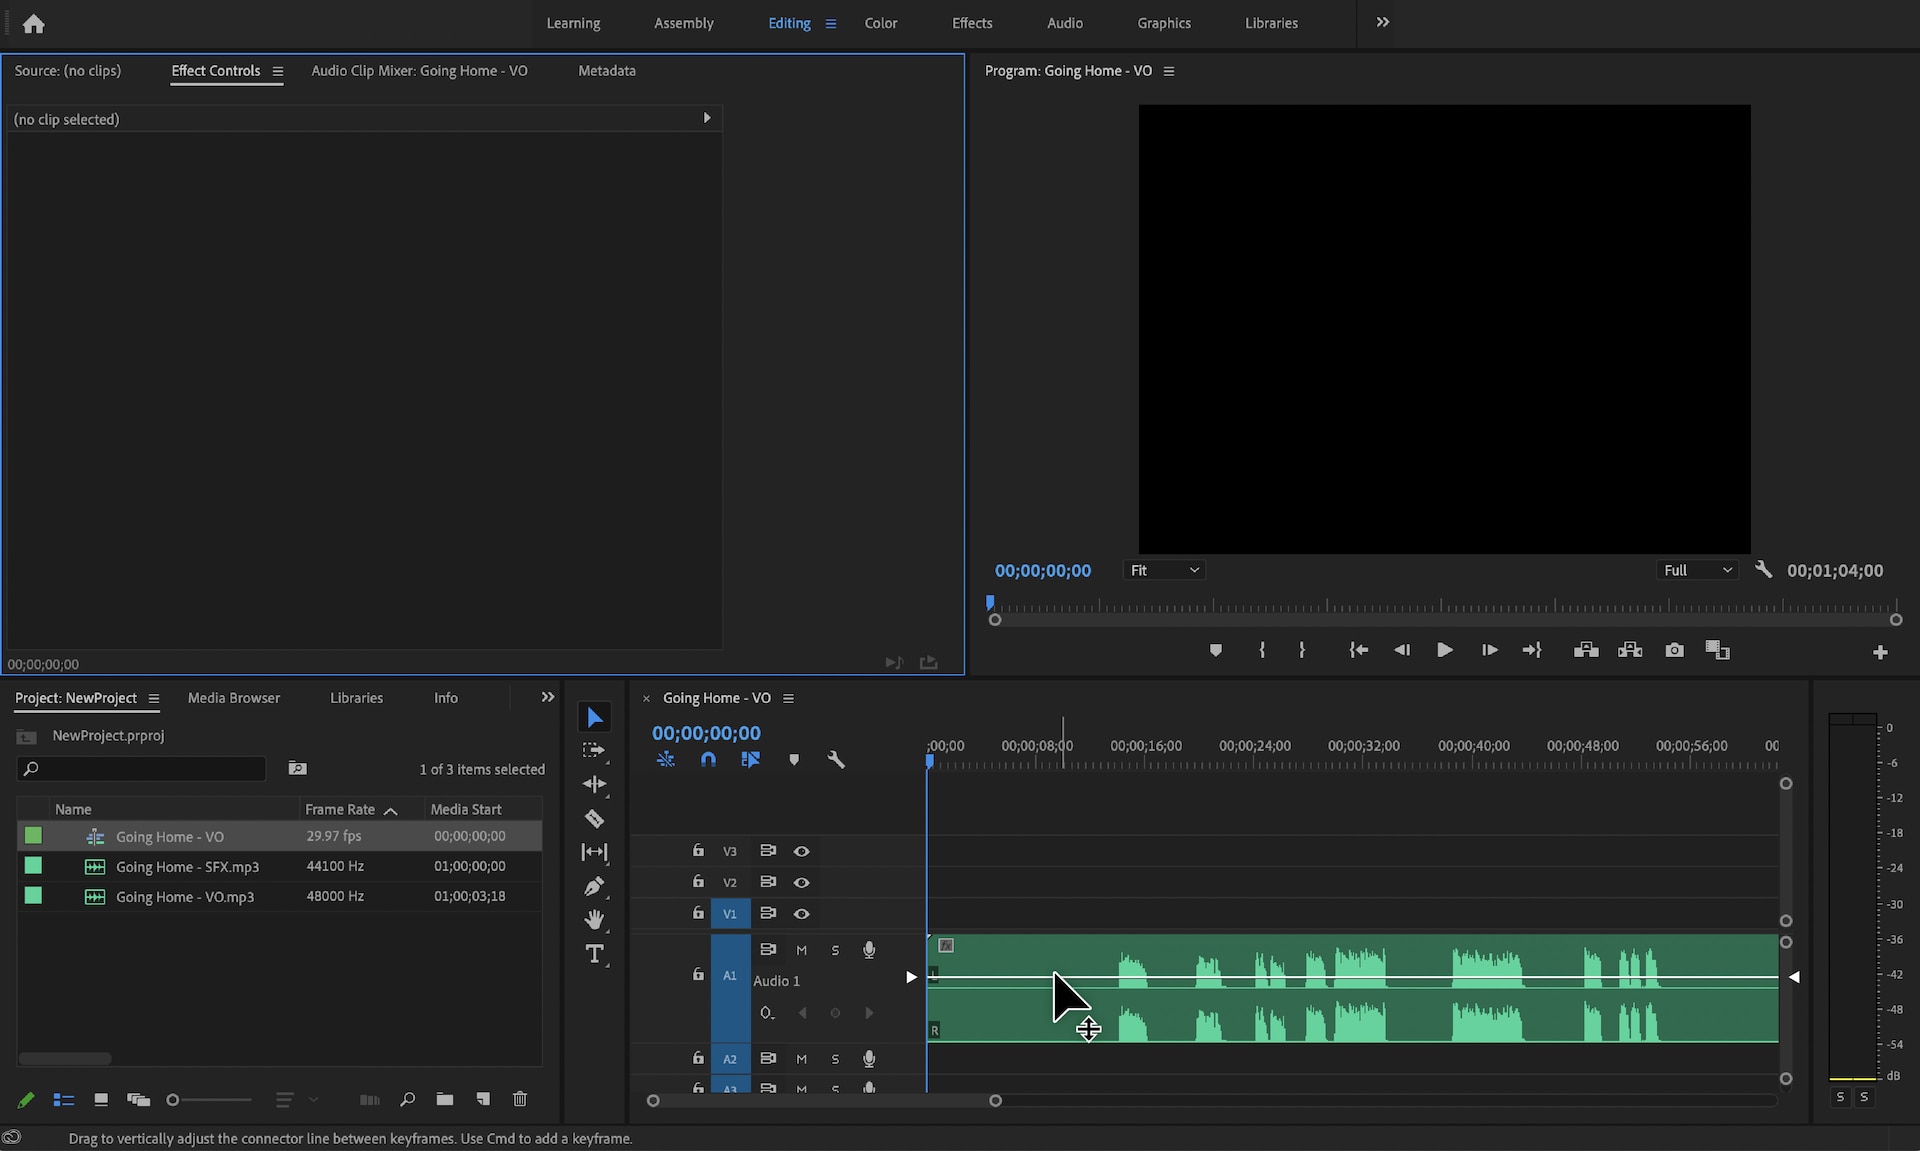 Adobe Premiere Pro with Timeline panel open